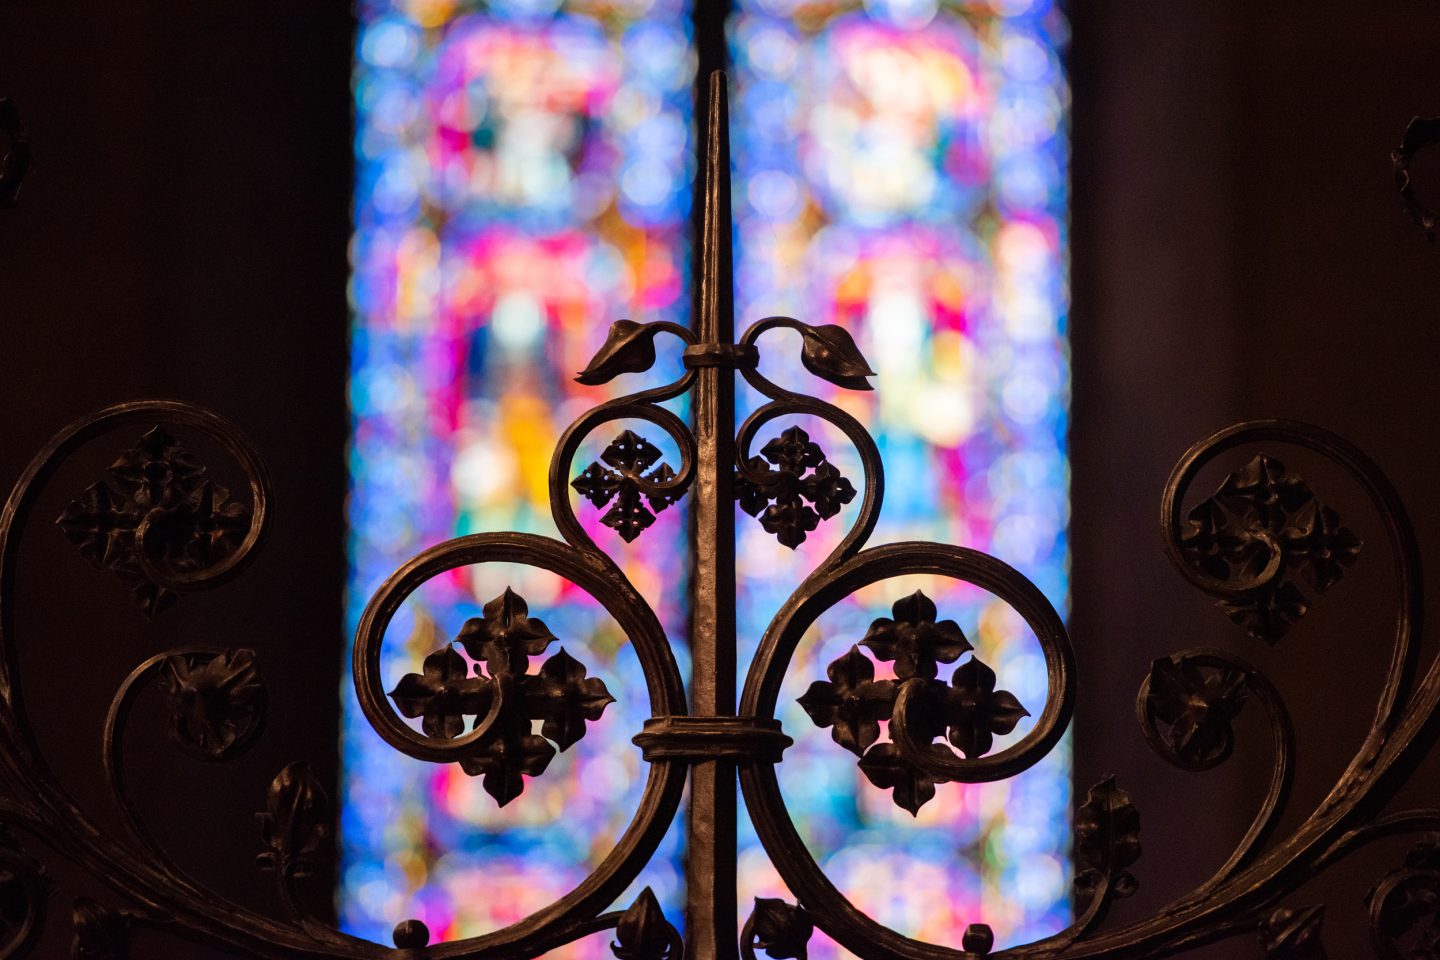 Detail of ironwork against backdrop of colorful stained glass window